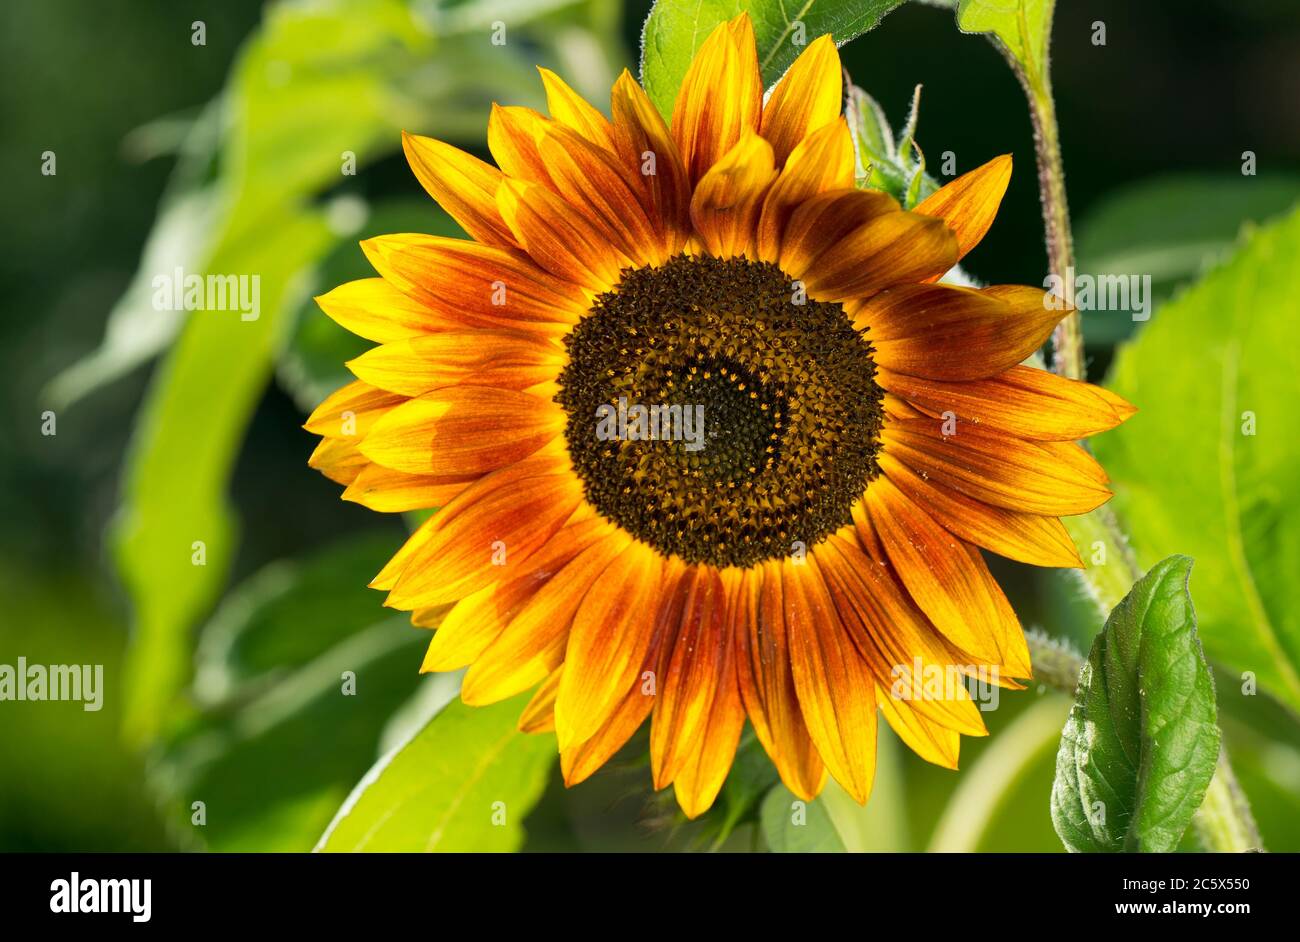 Ripe sunflower in brown color. Flower in the garden in Europe. Stock Photo